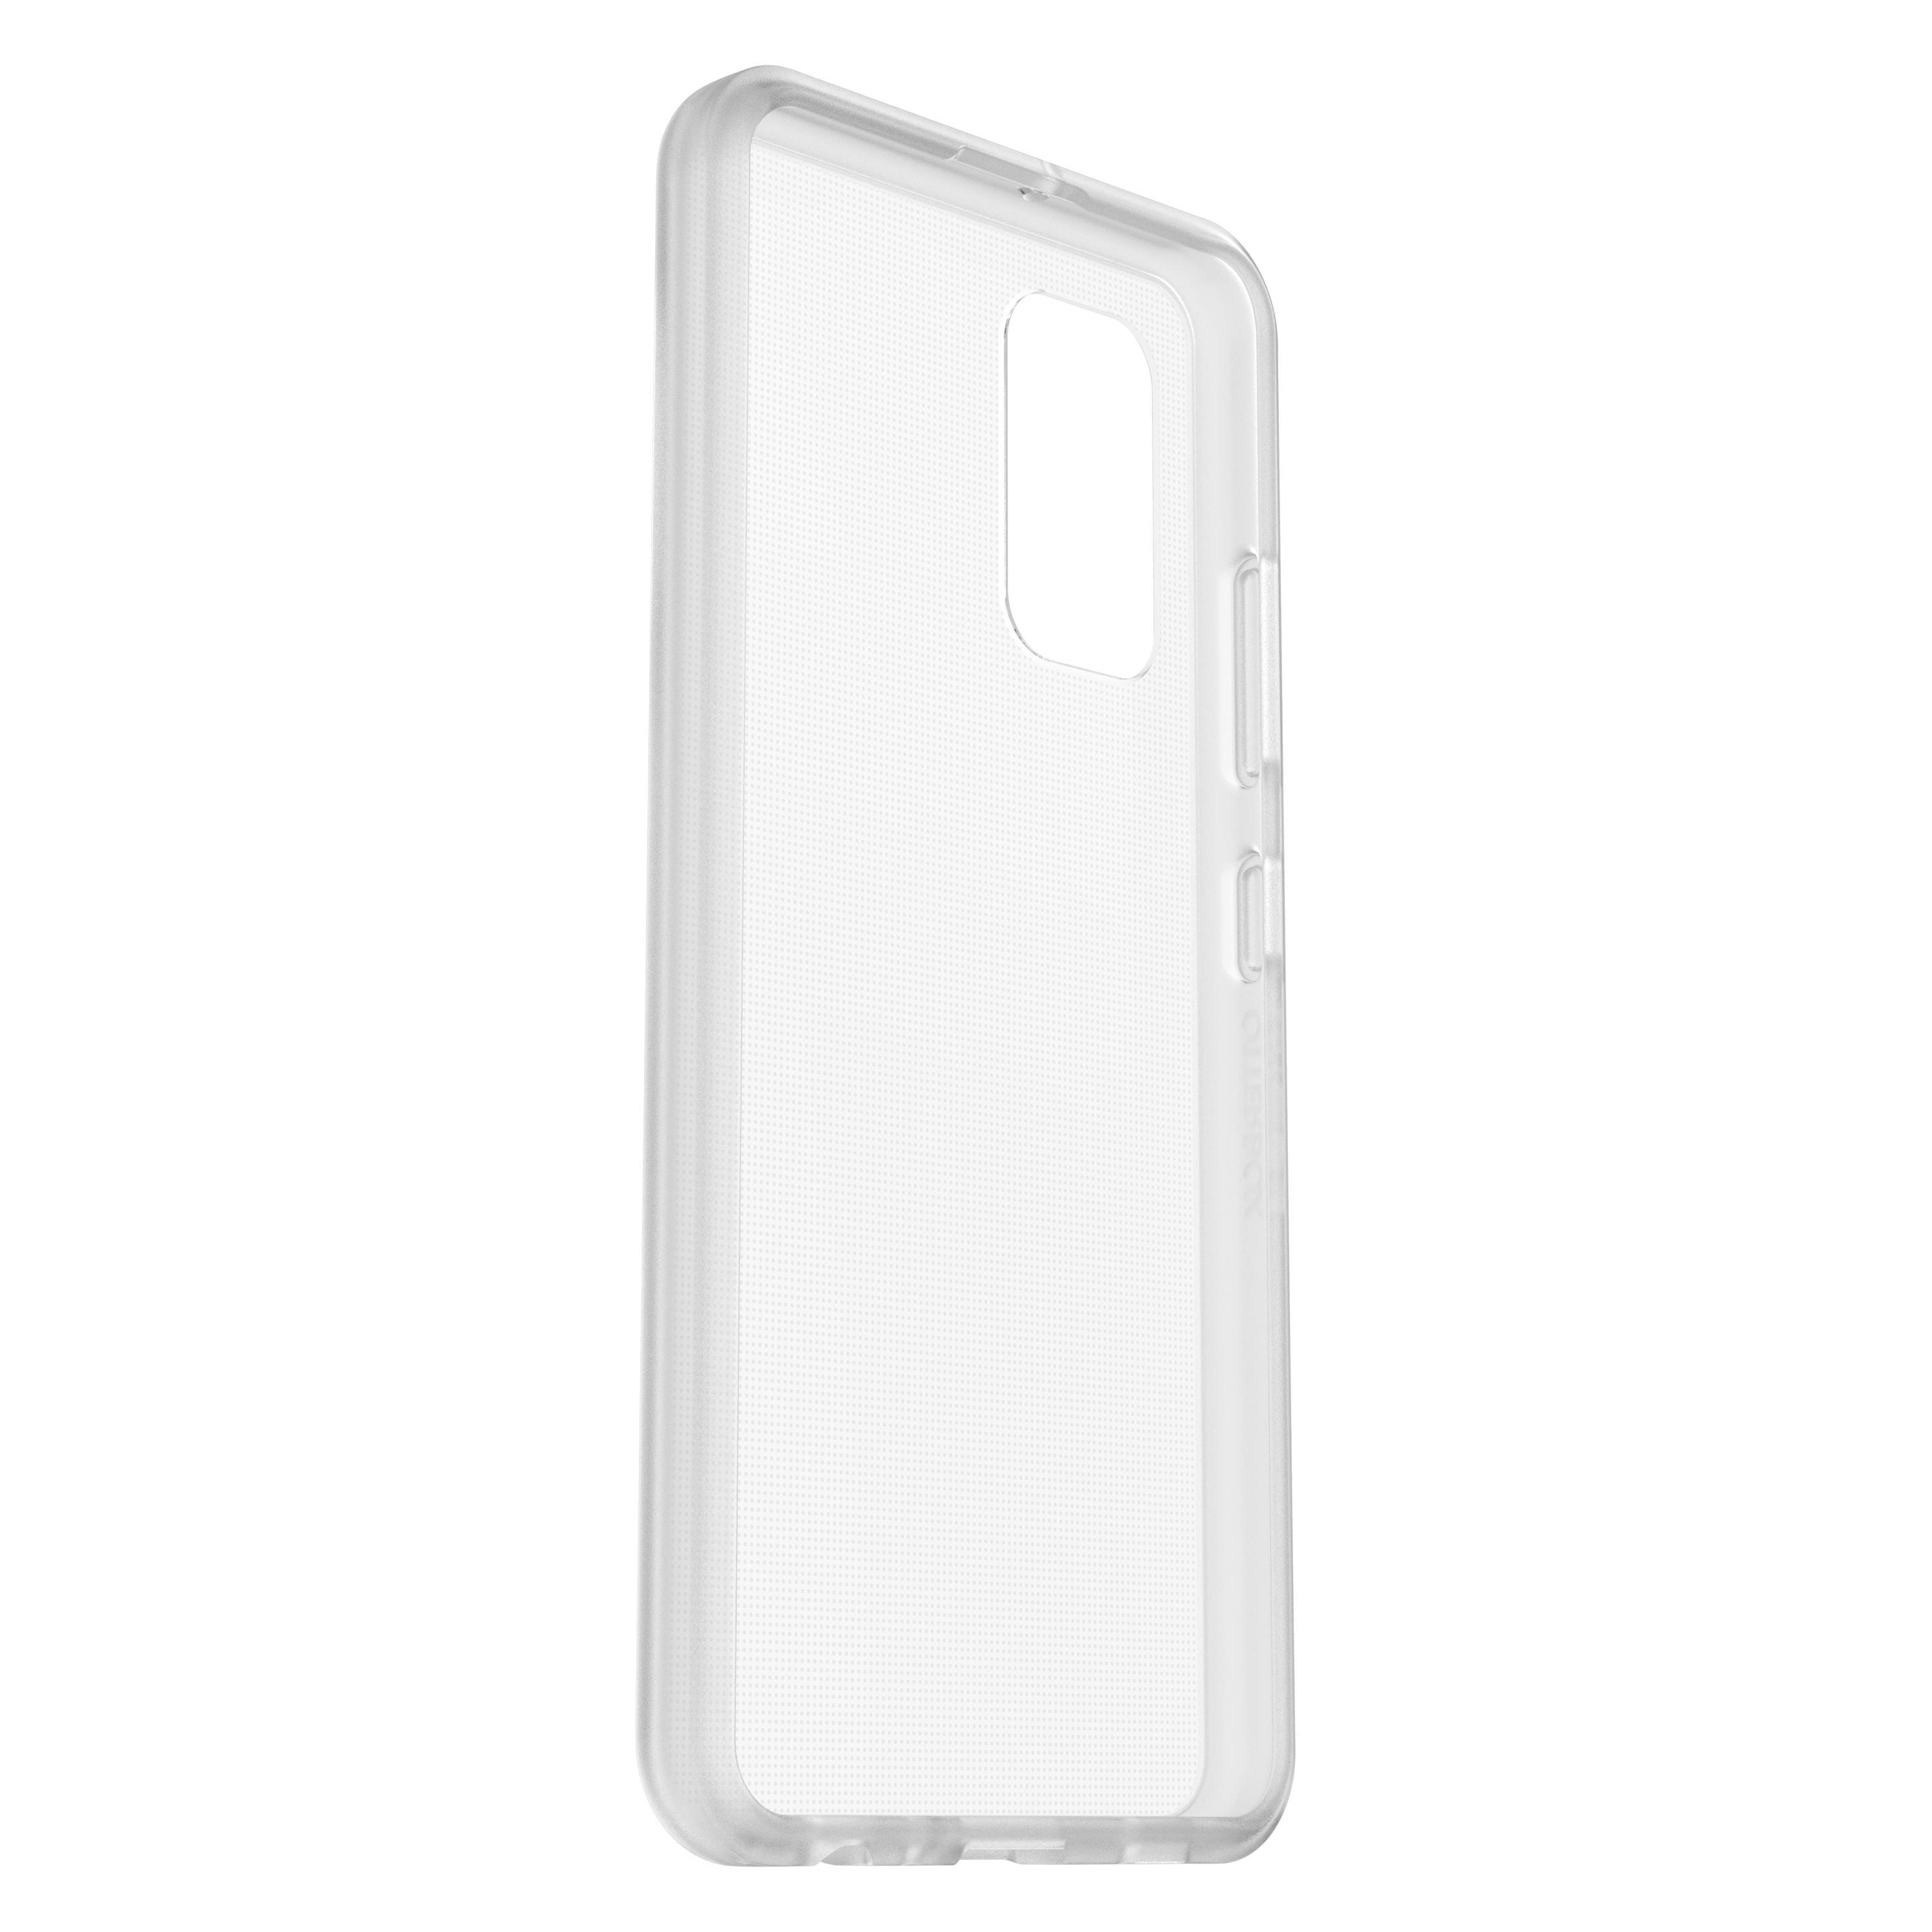 Backcover, OTTERBOX Samsung, Galaxy React, A32, Transparent